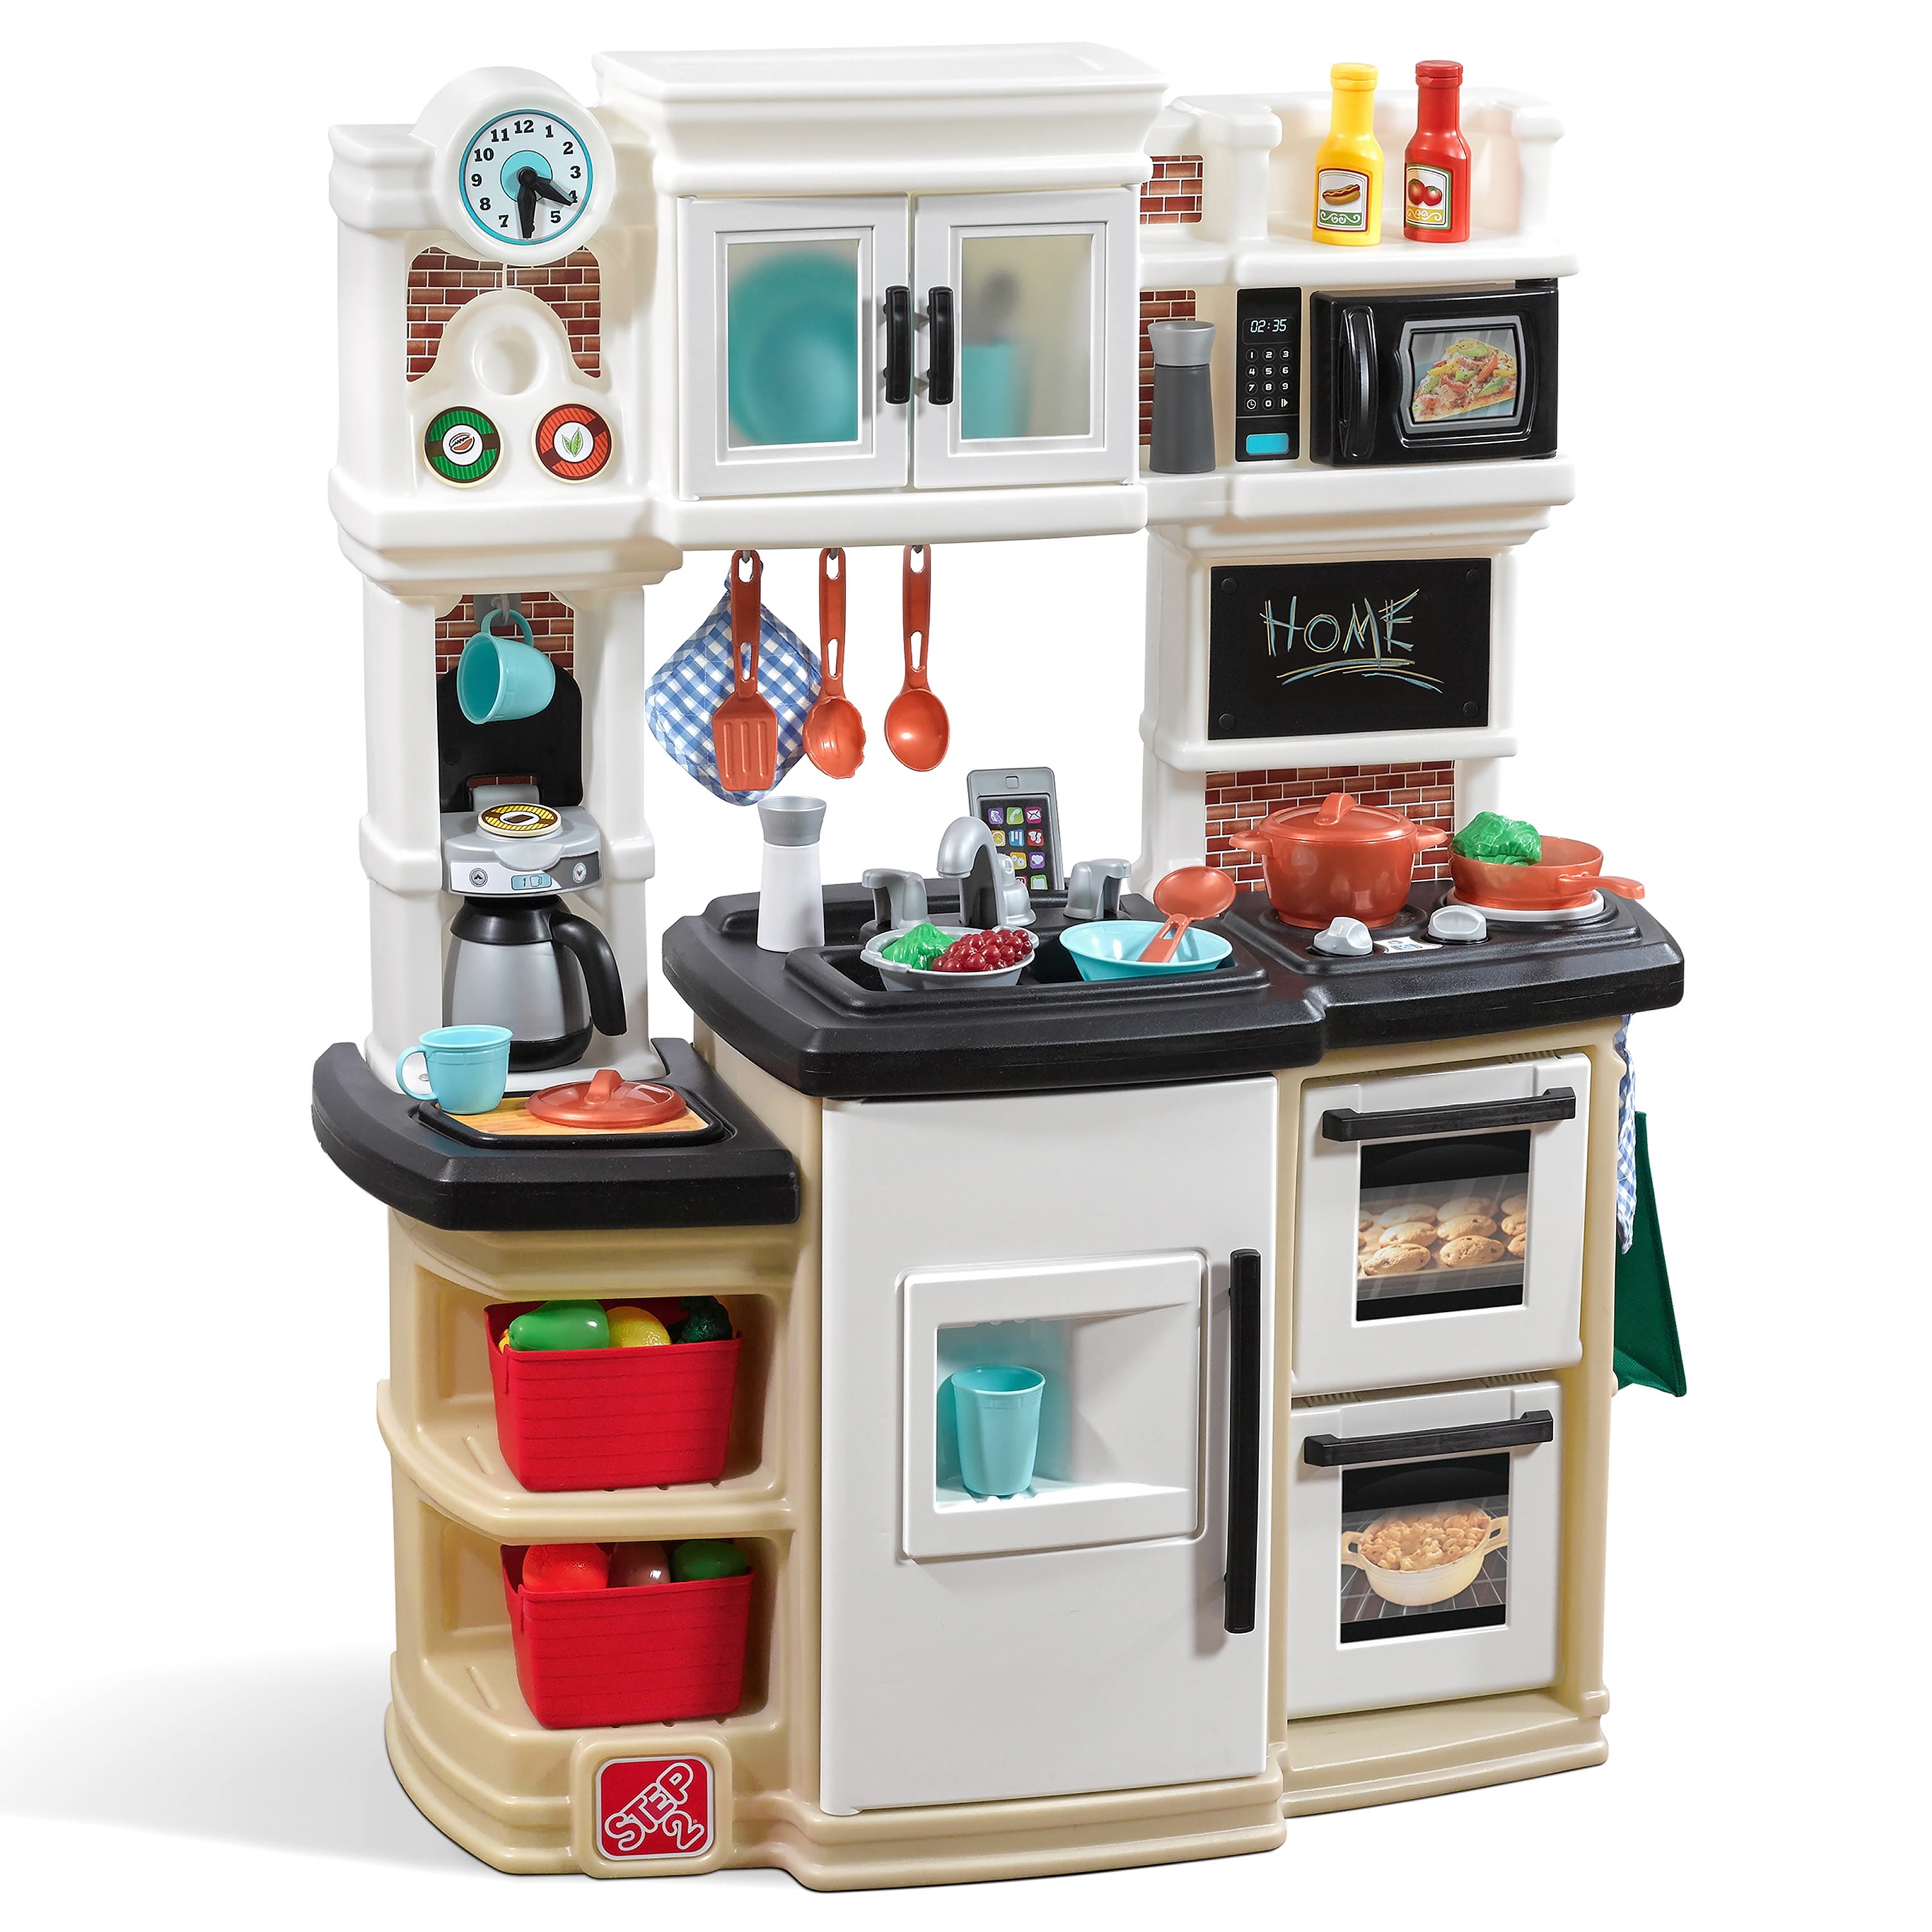 Step2 488599 Kids Plastic Cooking Kitchen Playset for sale online 